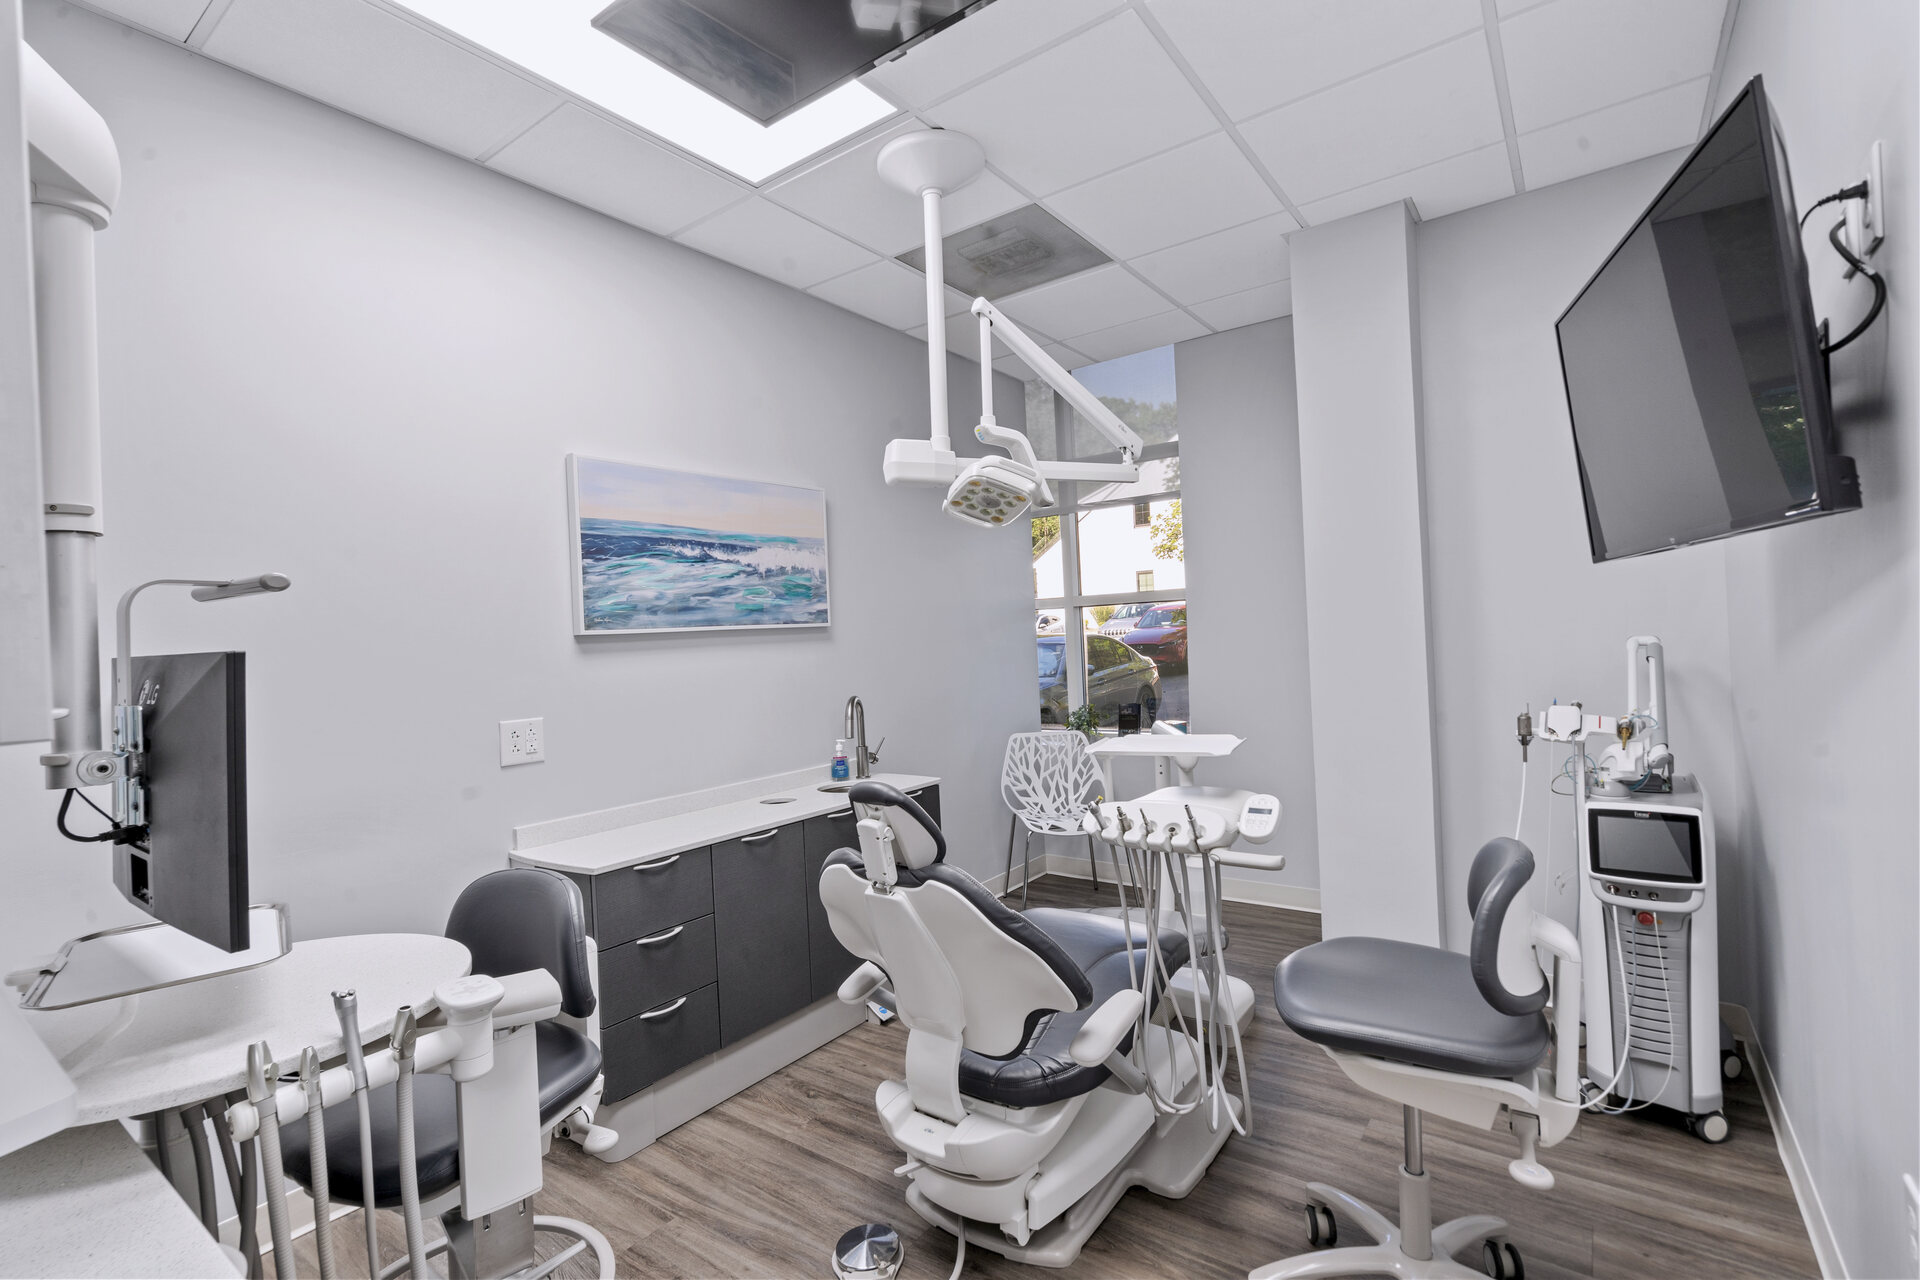 An office at Aspire Dental Wellness with laser technology and other equipment